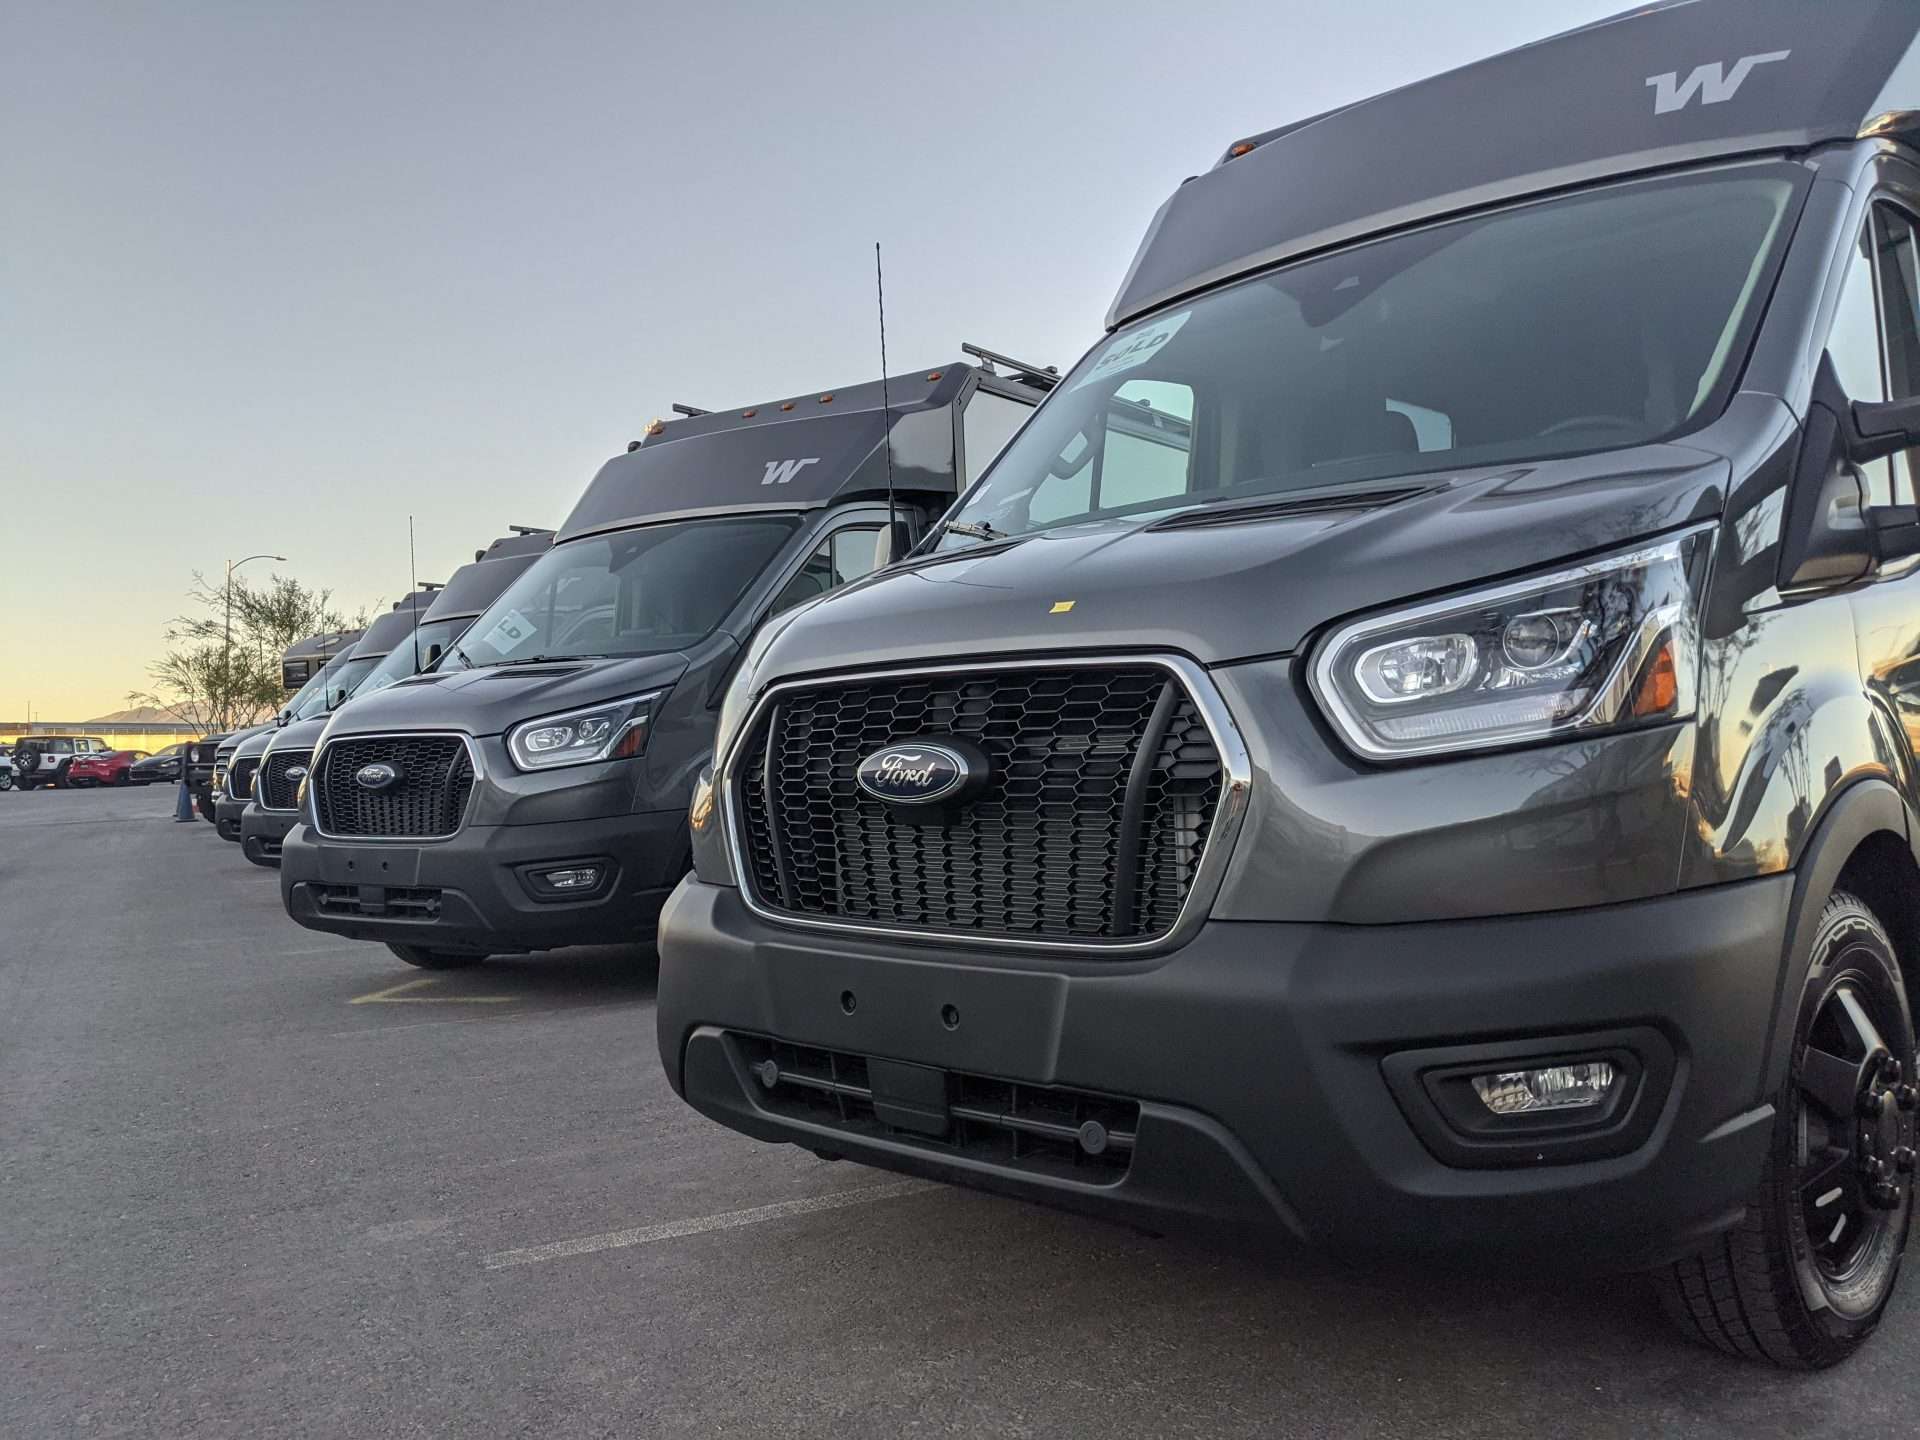 rv manufacturer Winnedbago builds the EKKO on a ford transit chassis